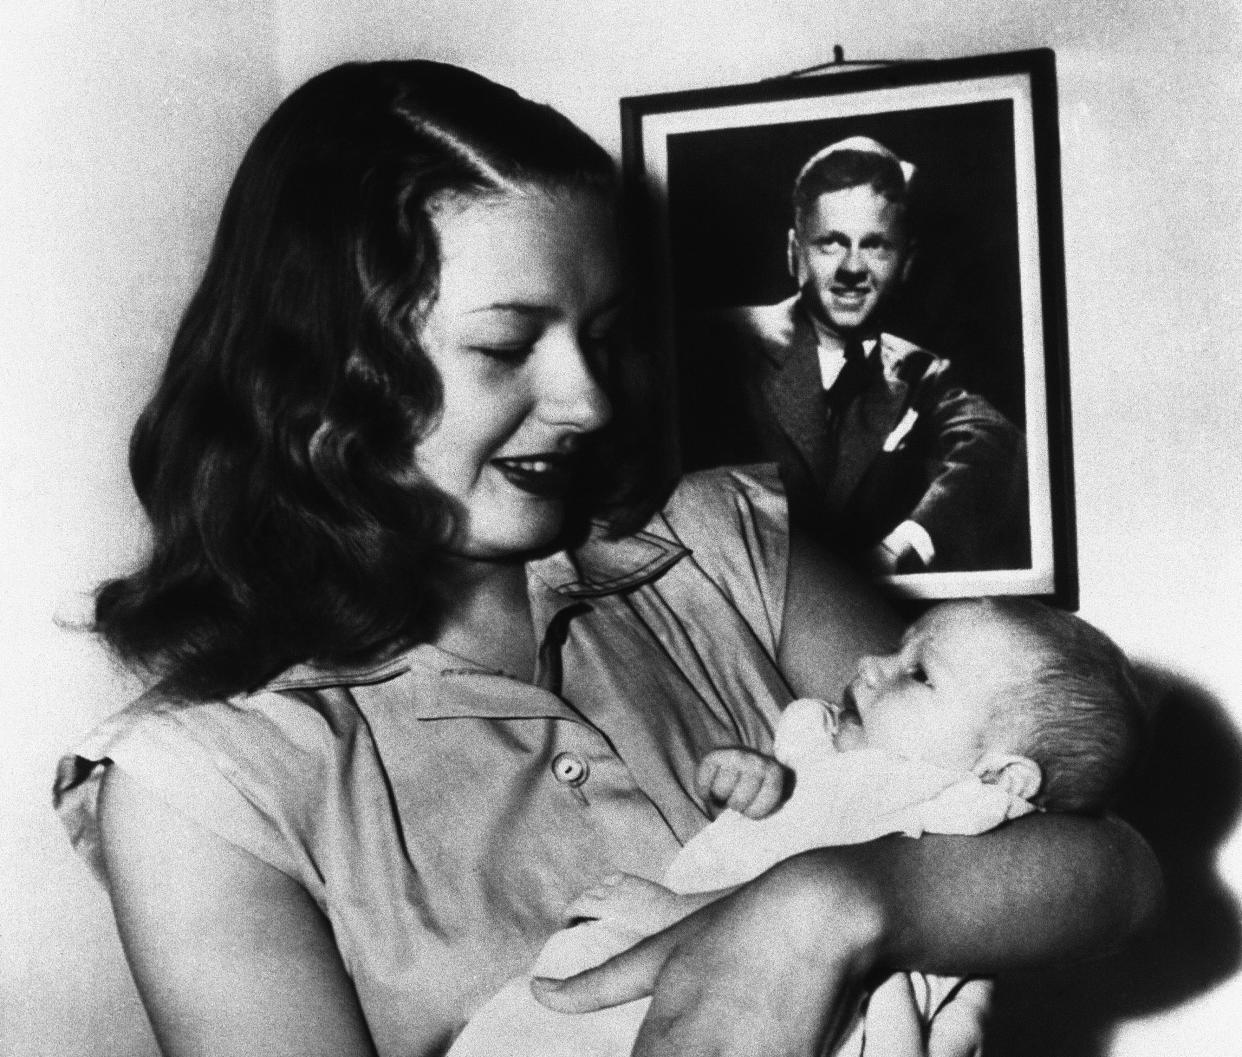 Mrs. Mickey Rooney, Betty Jane Rase, holds Mickey Rooney Jr., the youngster weighed 7lbs 5ozs at birth on August 3, 1945. Father Mickey Rooney was serving the European Theatre of operations at the time. 